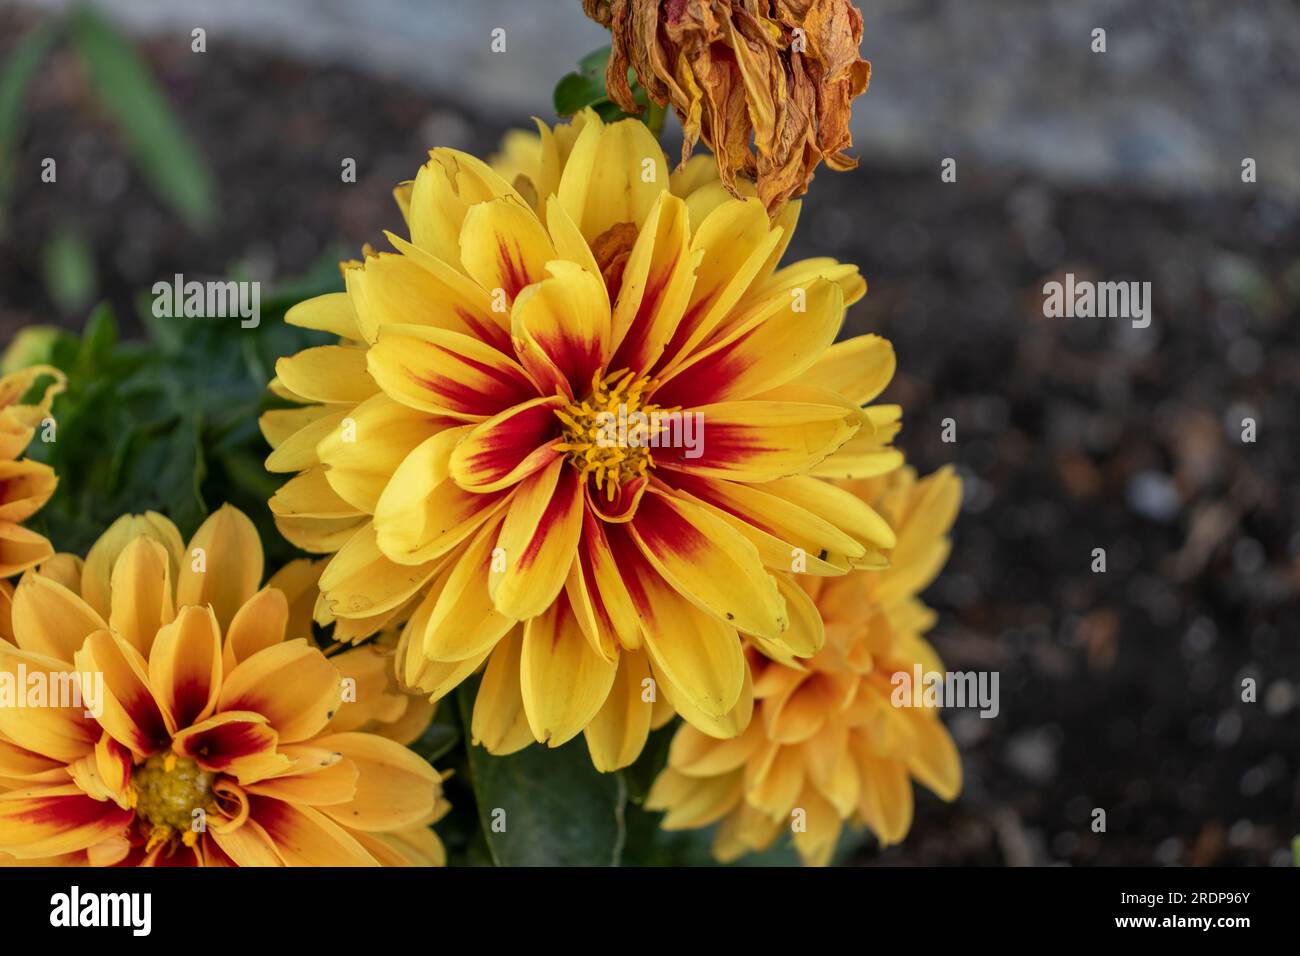 Four vibrant dahlias - orange, yellow and red - bloom in a garden bed with green foliage and a dried flower Stock Photo